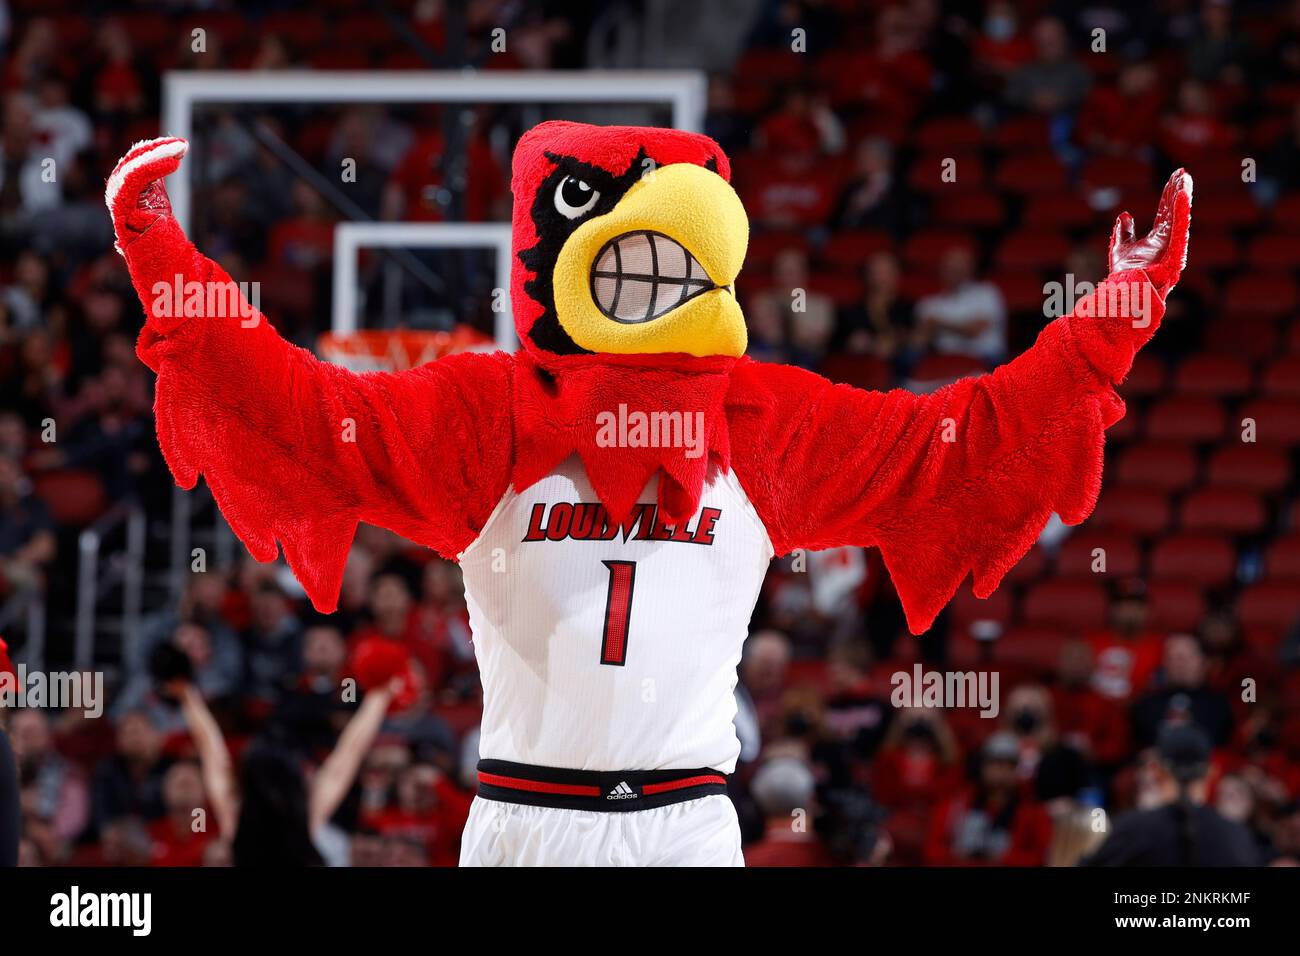 LOUISVILLE, KY - FEBRUARY 16: Louisville Cardinals mascot Louie is seen  during a college basketball game against the Miami Hurricanes on Feb. 16,  2022 at KFC Yum! Center in Louisville, Kentucky. (Photo